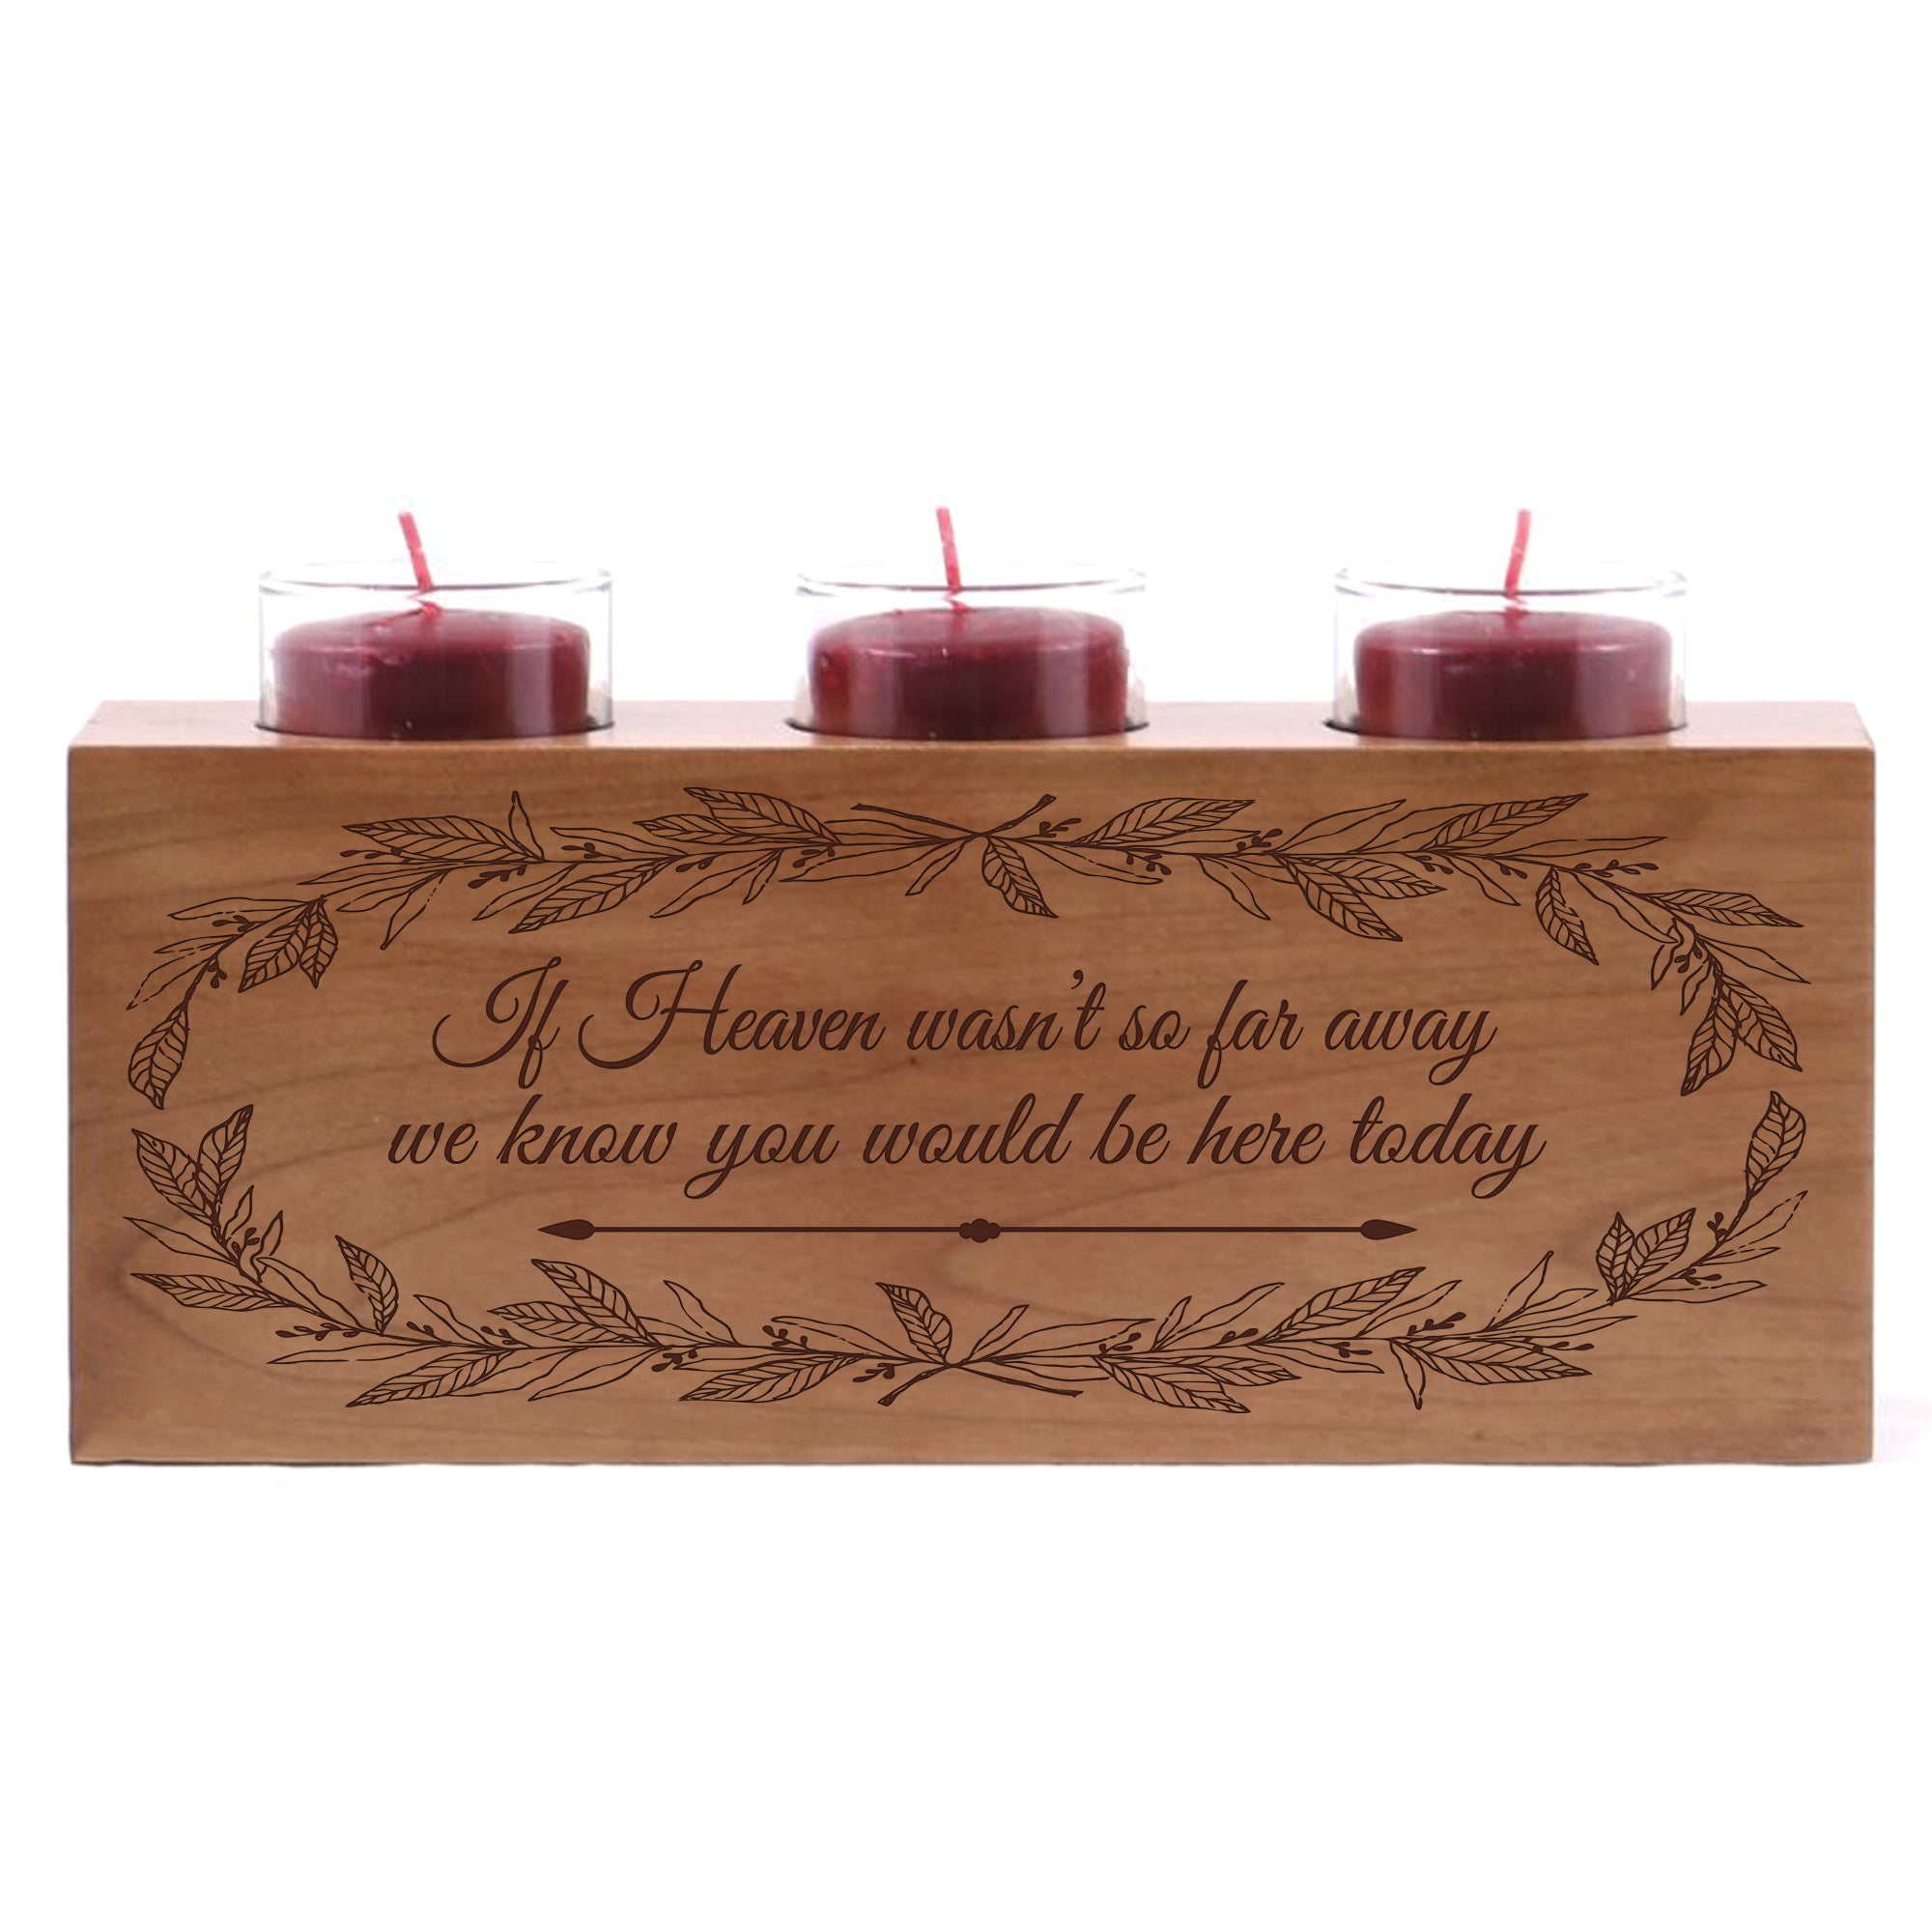 LifeSong Milestones Memorial Funeral Candle Holder Those Who We Love Don't Go Away engraved cherry wood keepsake ideas for Loved One 10" L x 4" H